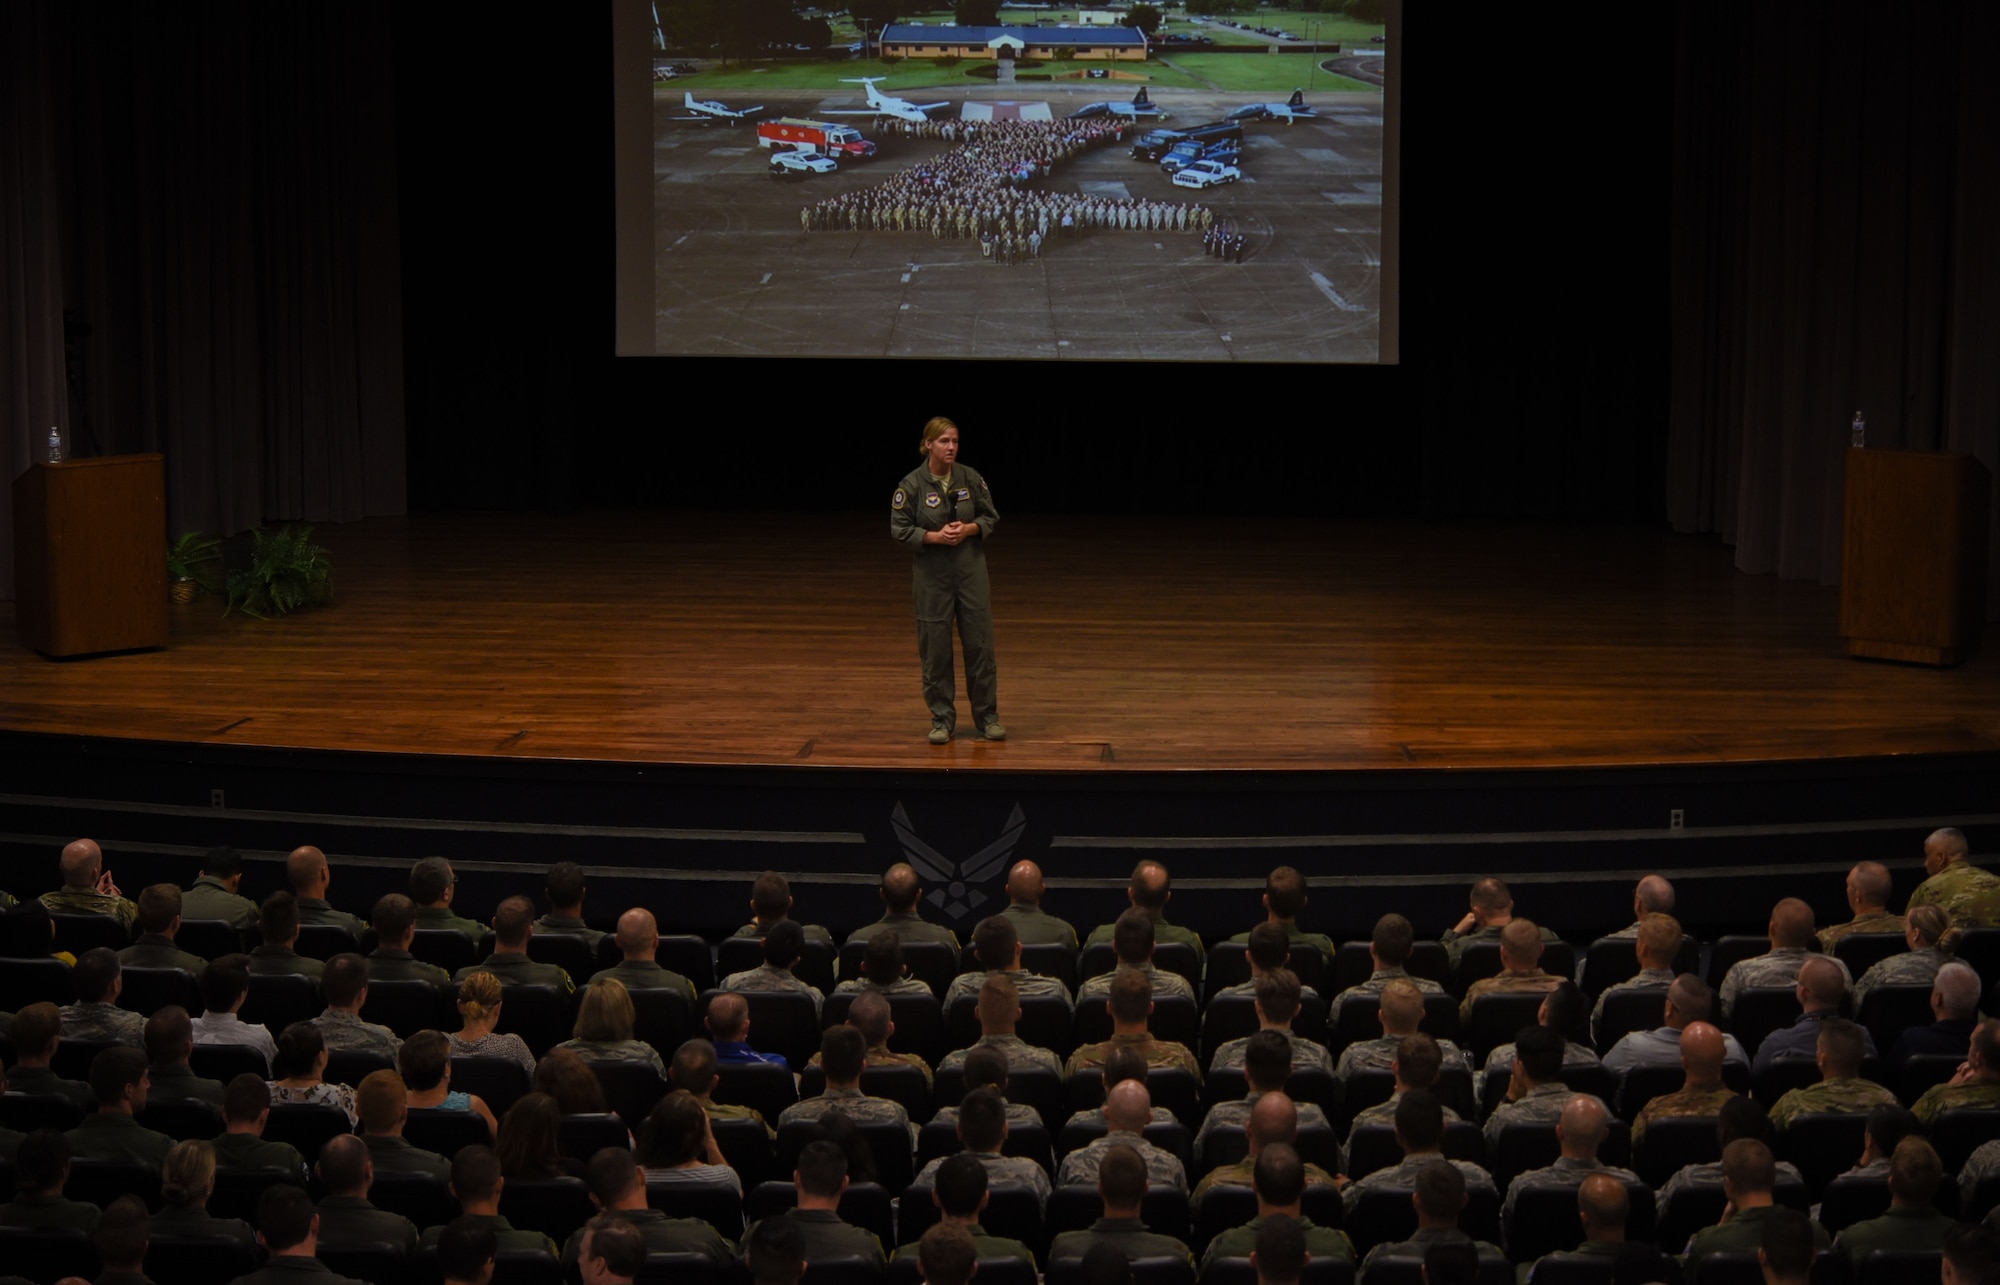 Col. Samantha Weeks, 14th Flying Training Wing commander, speaks during her commander’s call Aug. 22, 2019, at Columbus Air Force Base, Miss. Weeks held the commander’s call to communicate the importance of resiliency and mental health. (U.S. Air Force photo by Airman Davis Donaldson)